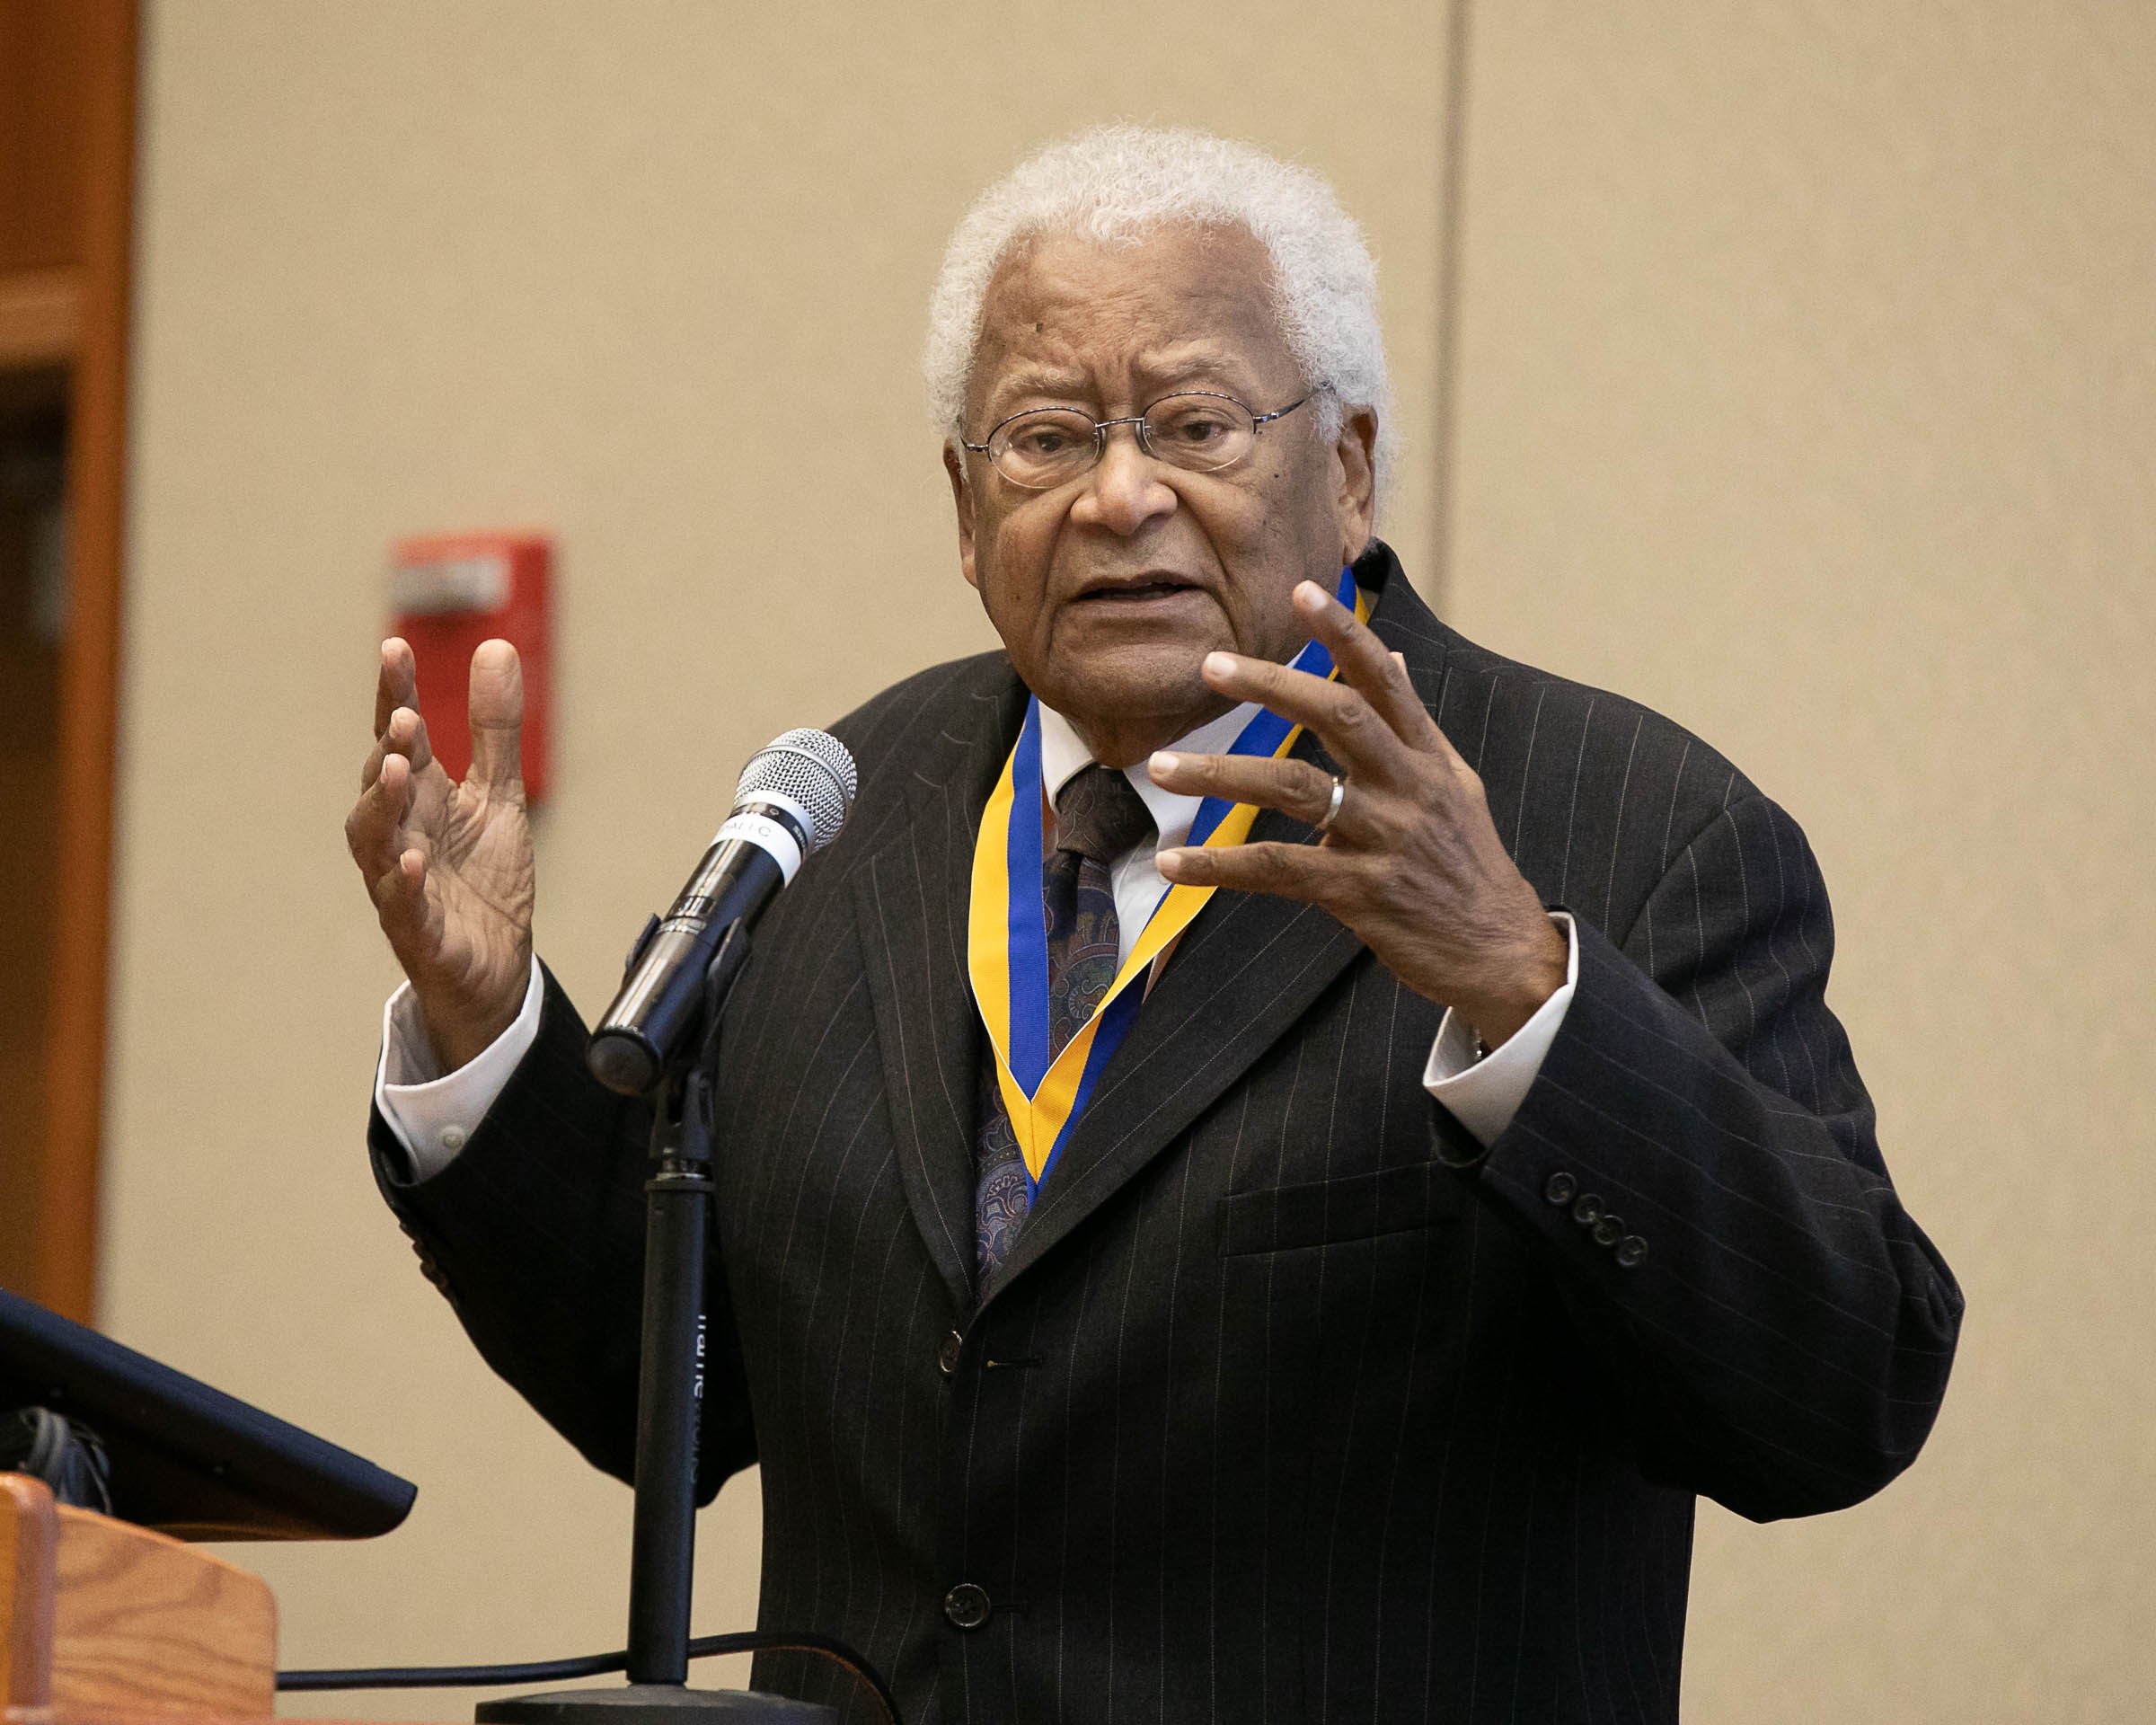 The Rev. James Lawson Jr. gives a speech after being presented with the UCLA Medal.